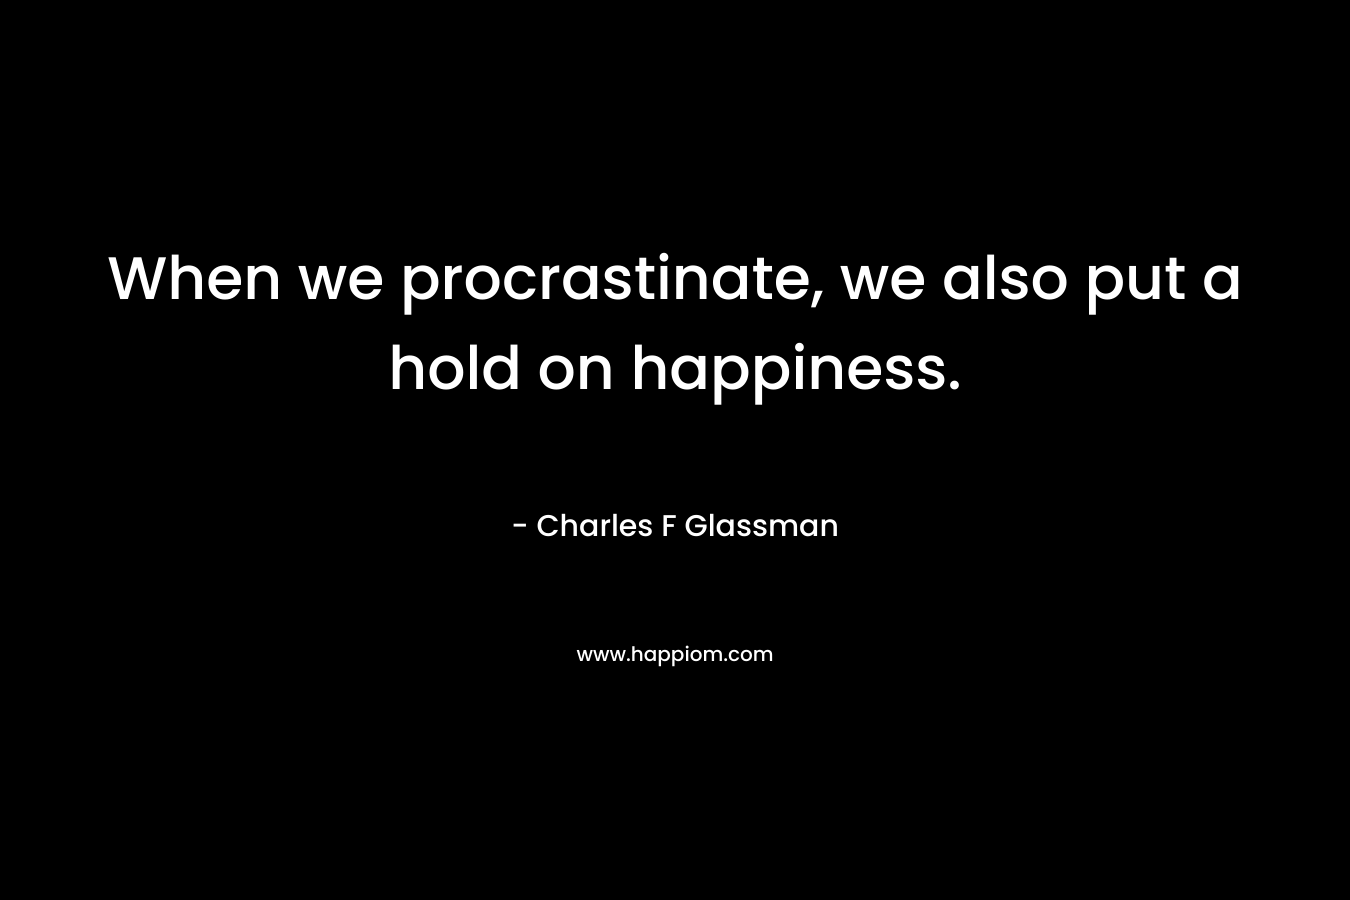 When we procrastinate, we also put a hold on happiness.